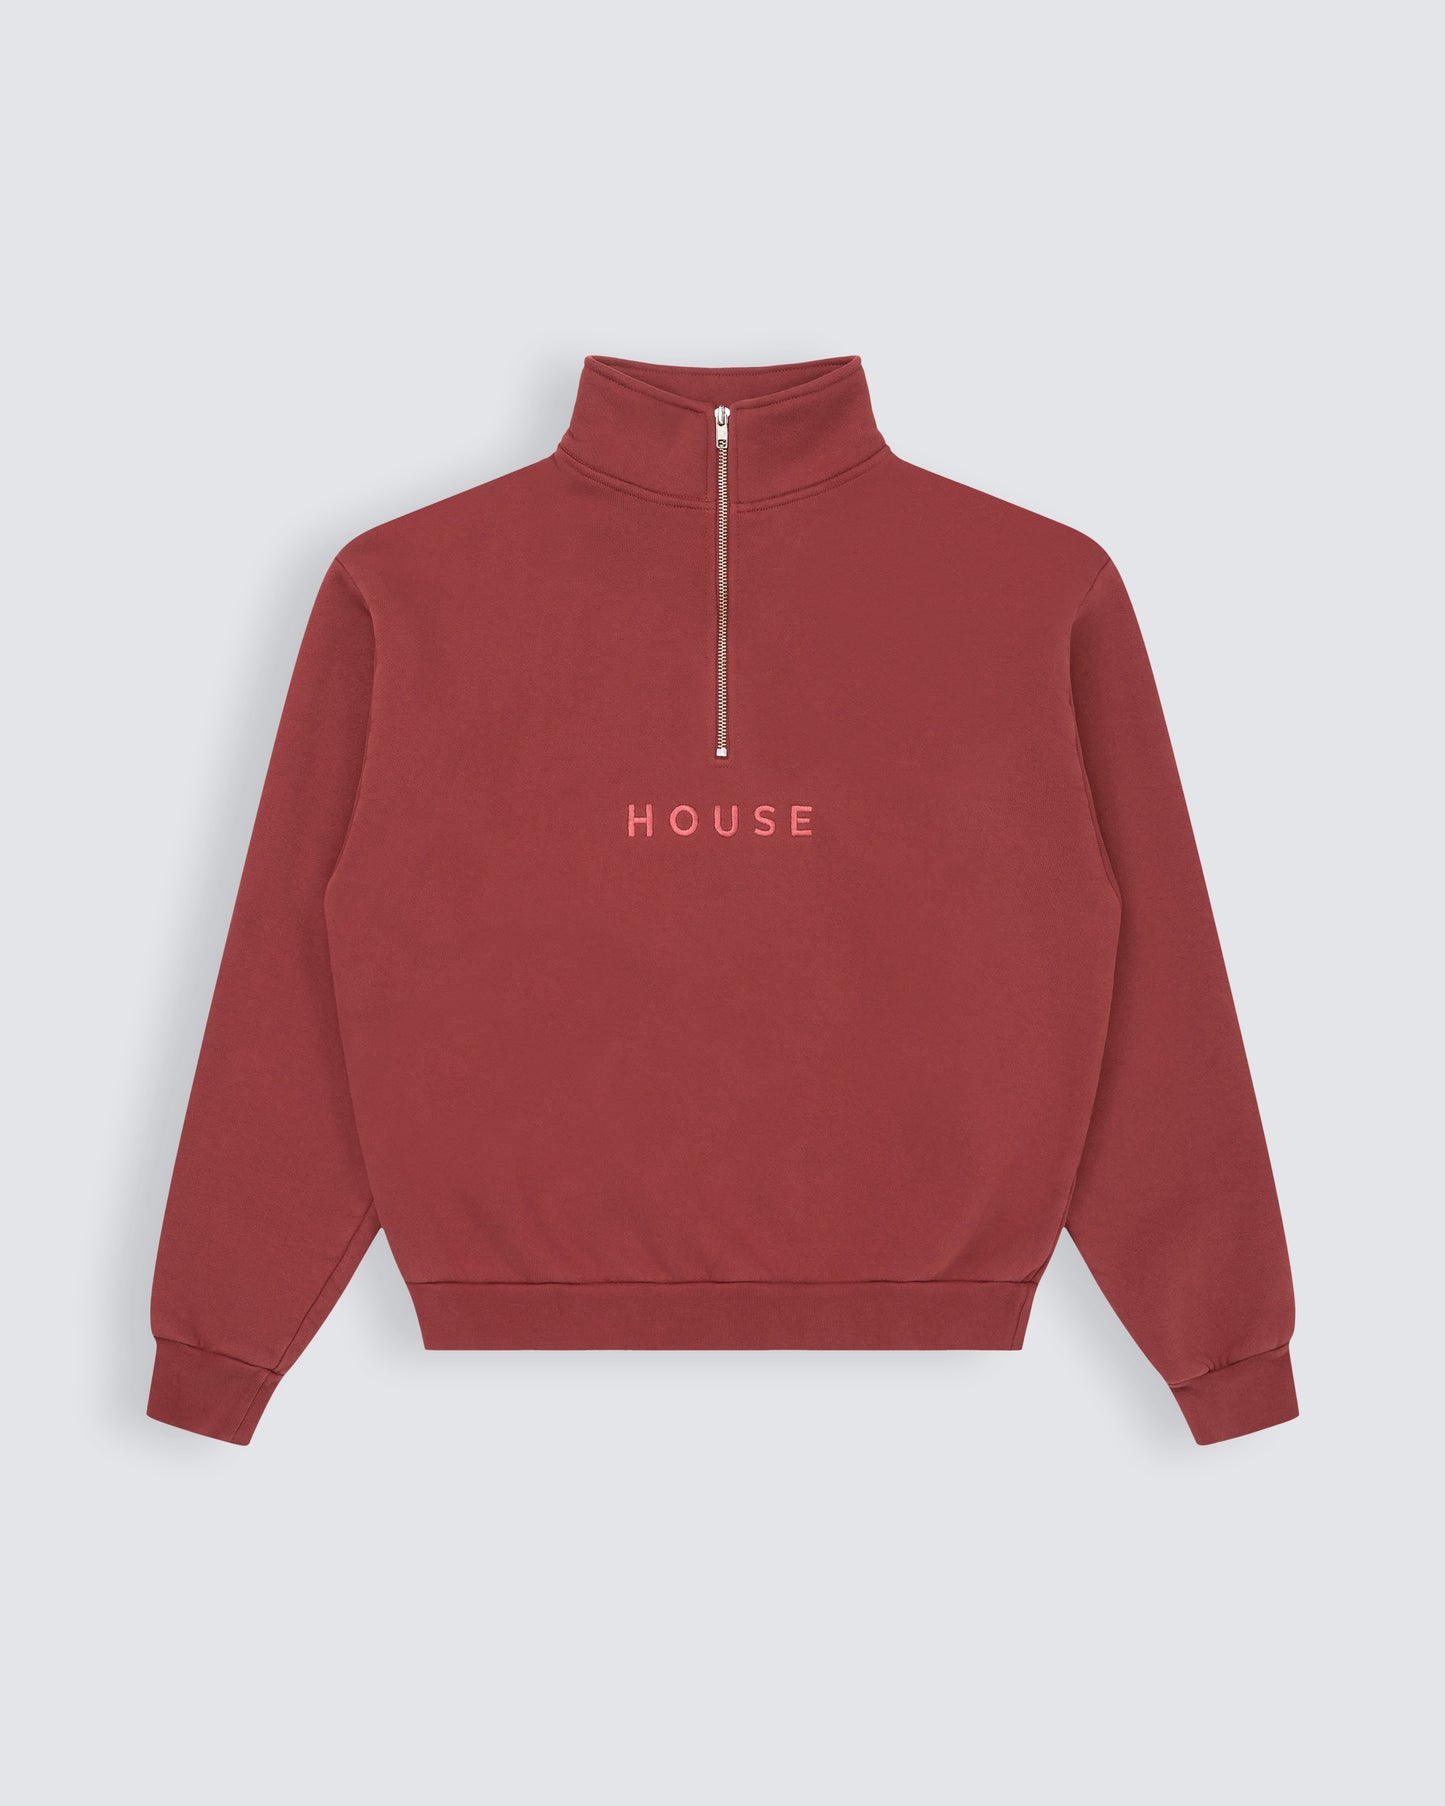 Quarter zip House iD sports top in mars red